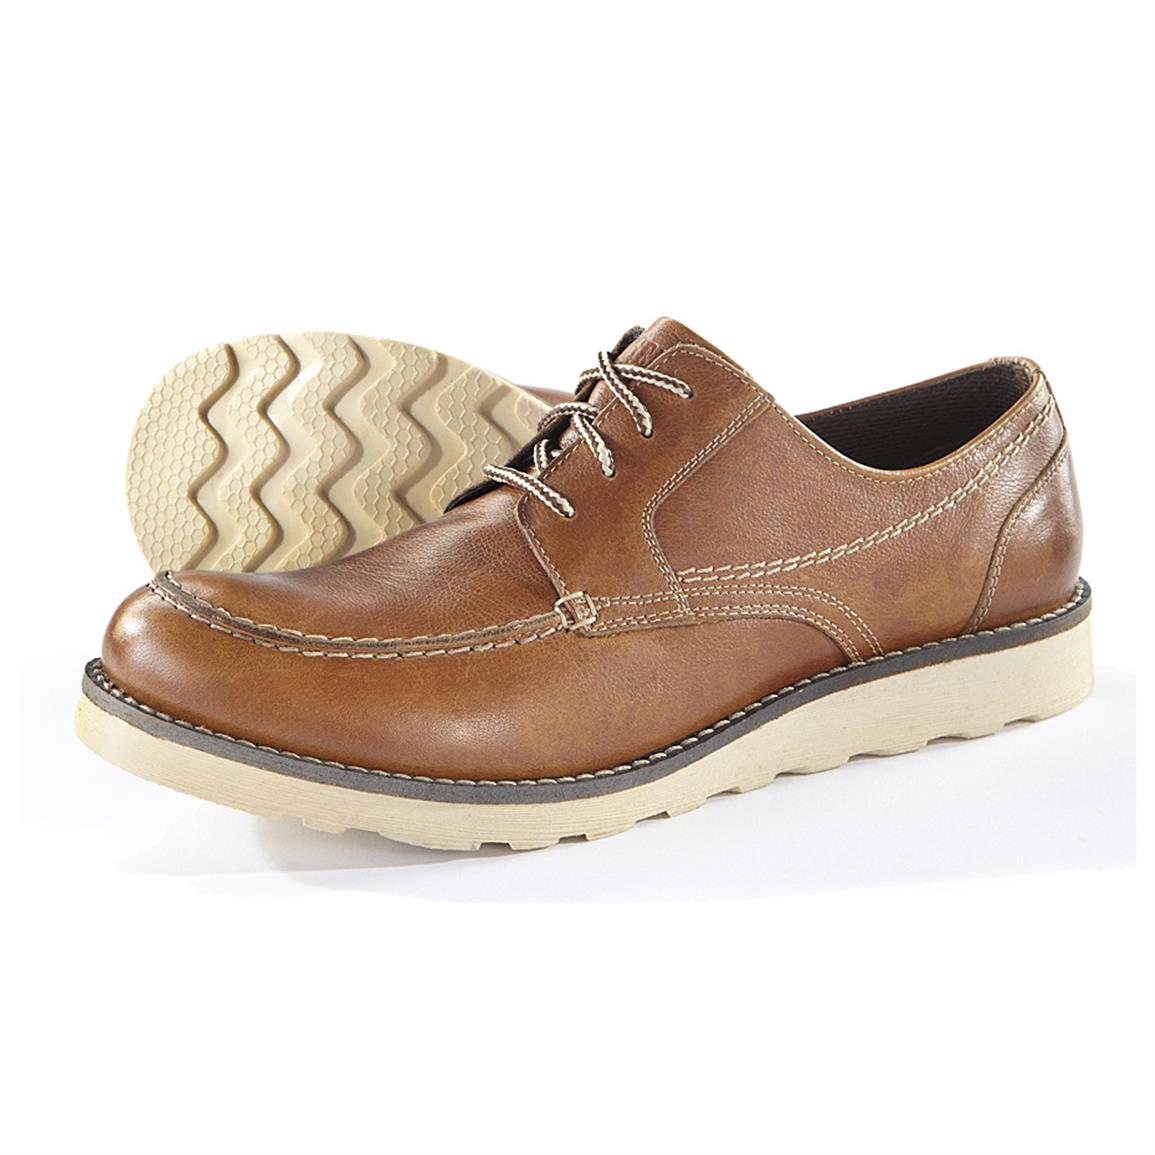 Guide Gear Men's Stonebridge Low Wedge Shoes - 609793, Work Boots at ...